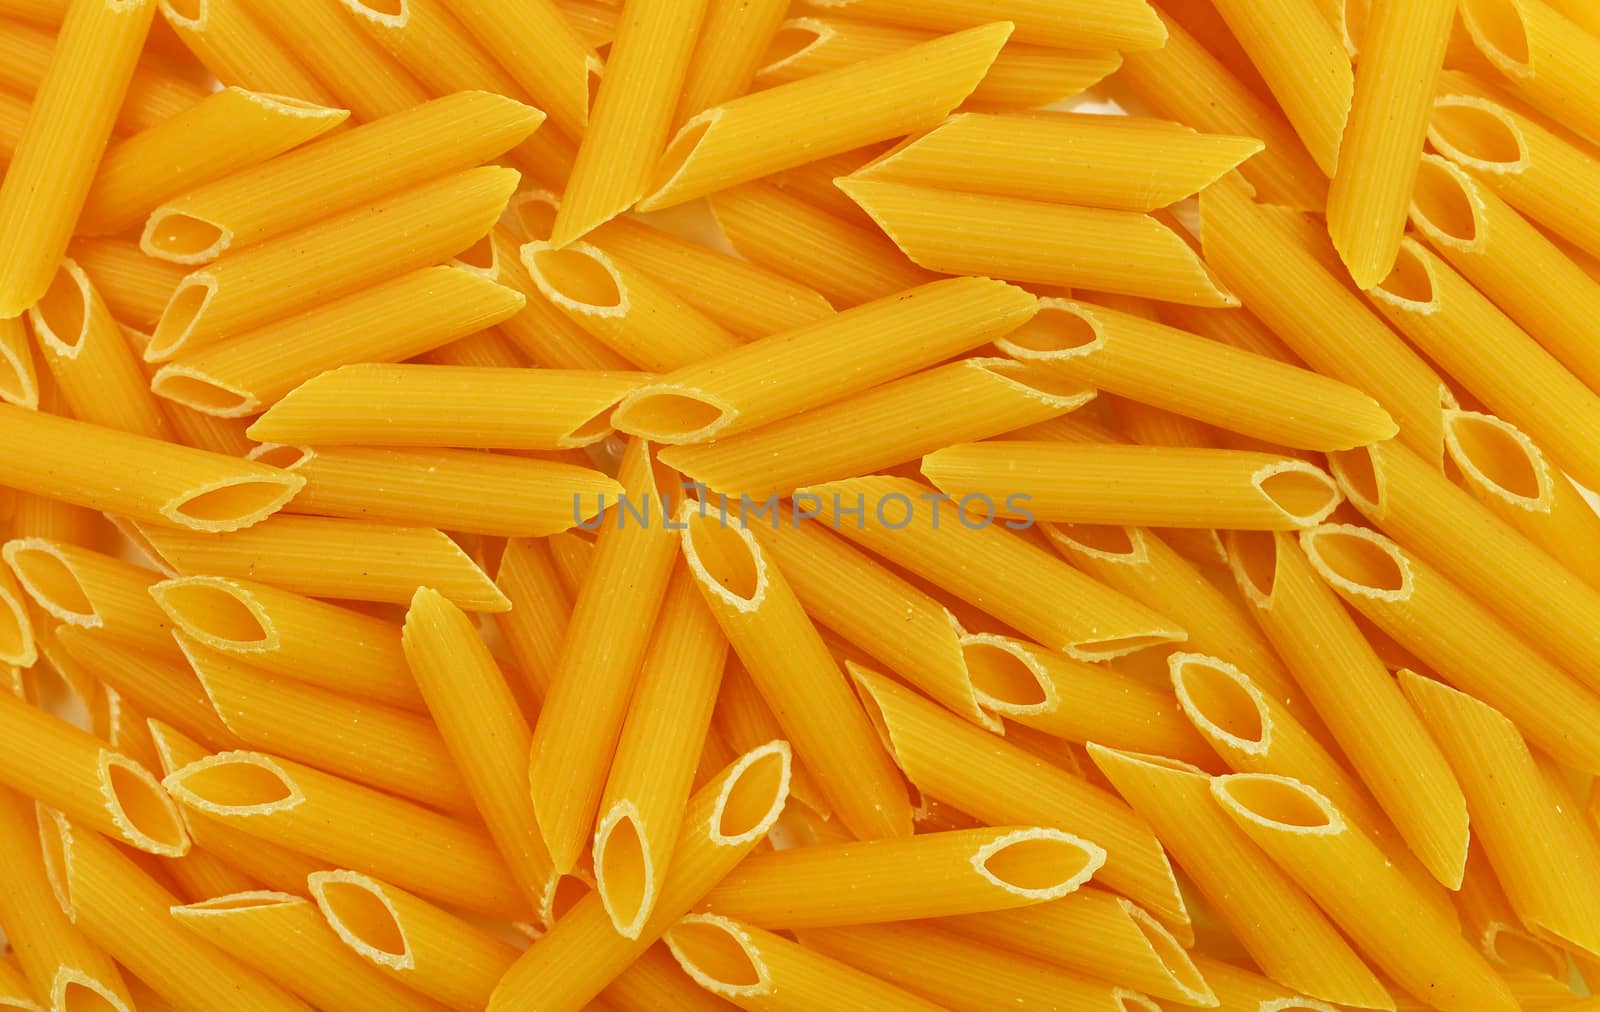 Penne pasta dry feathers food texture pattern